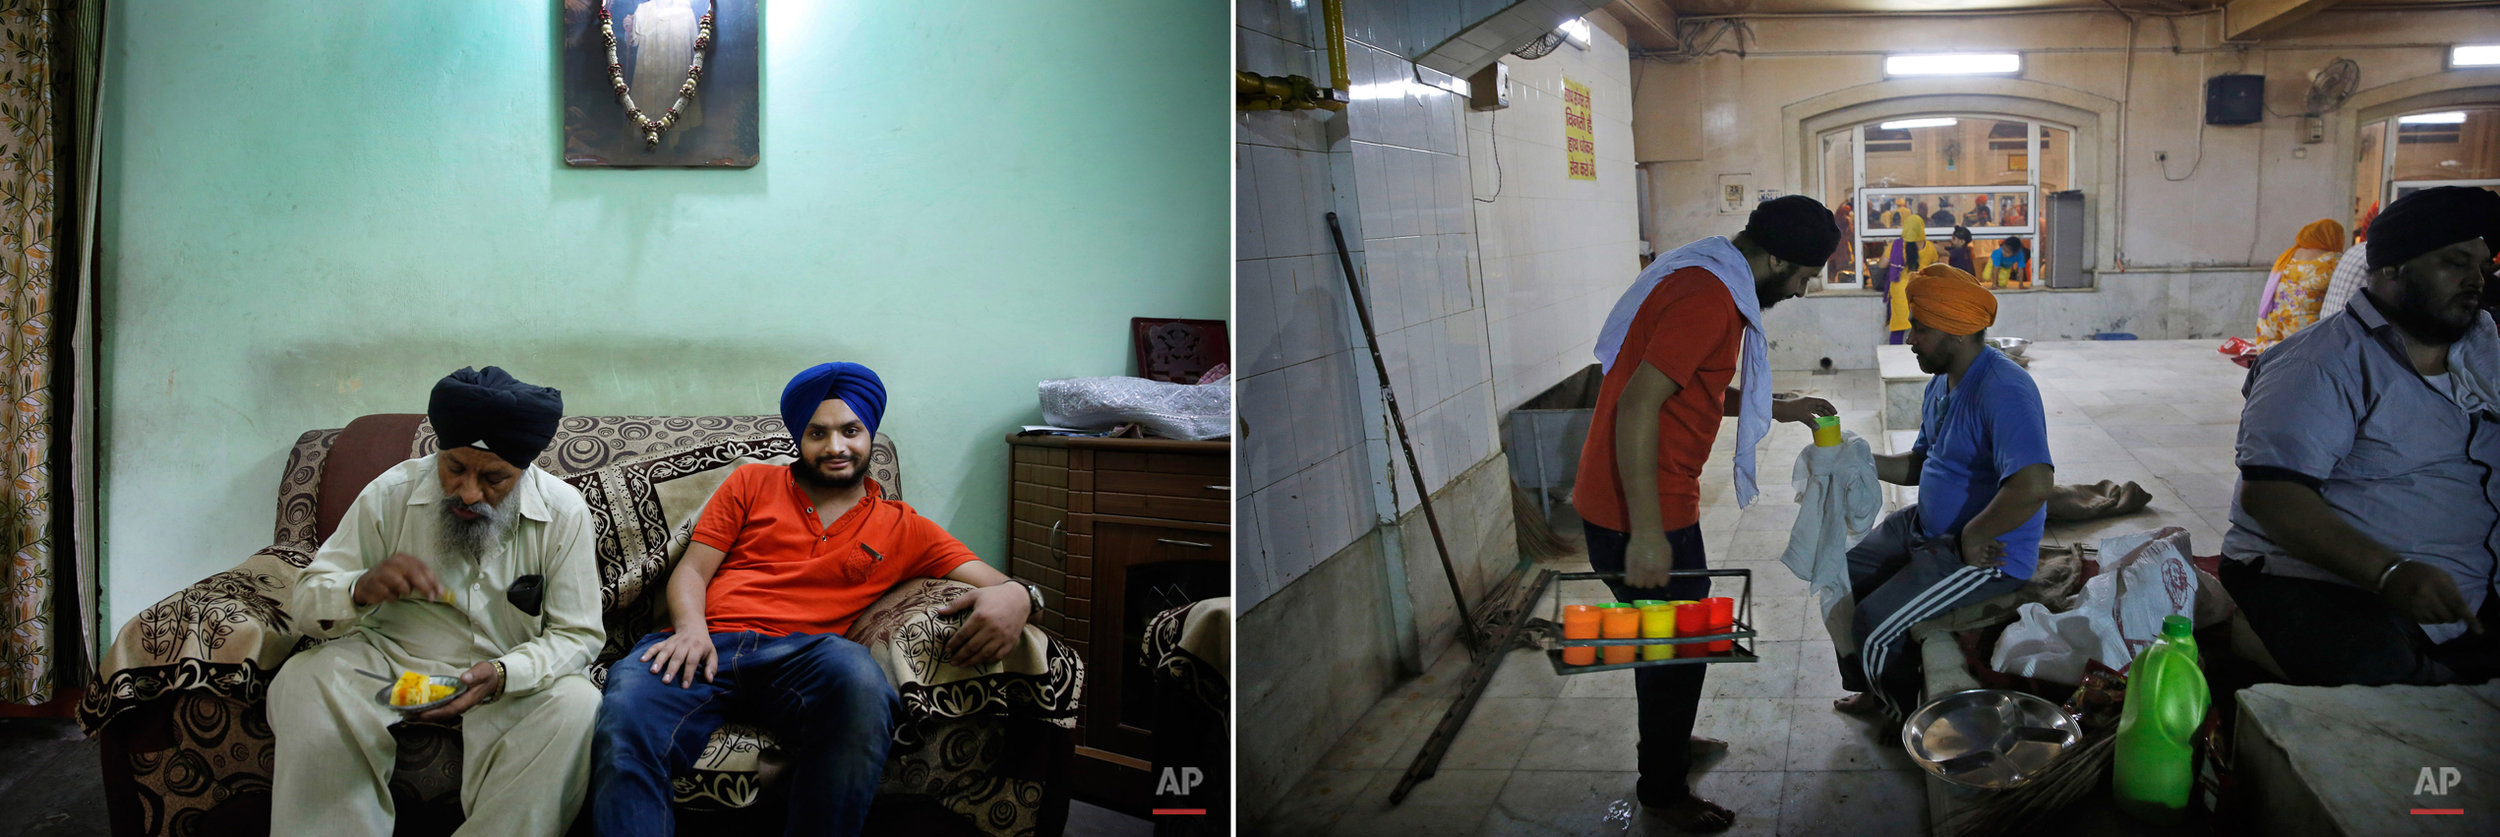  This two picture combo shows on left, Manpreet Singh, 23, who works in a call centre, sits with his father, at their house in New Delhi, India, on May 30, 2015, as on right, he serves drinking water to a Sikh devotee during langar, or free community